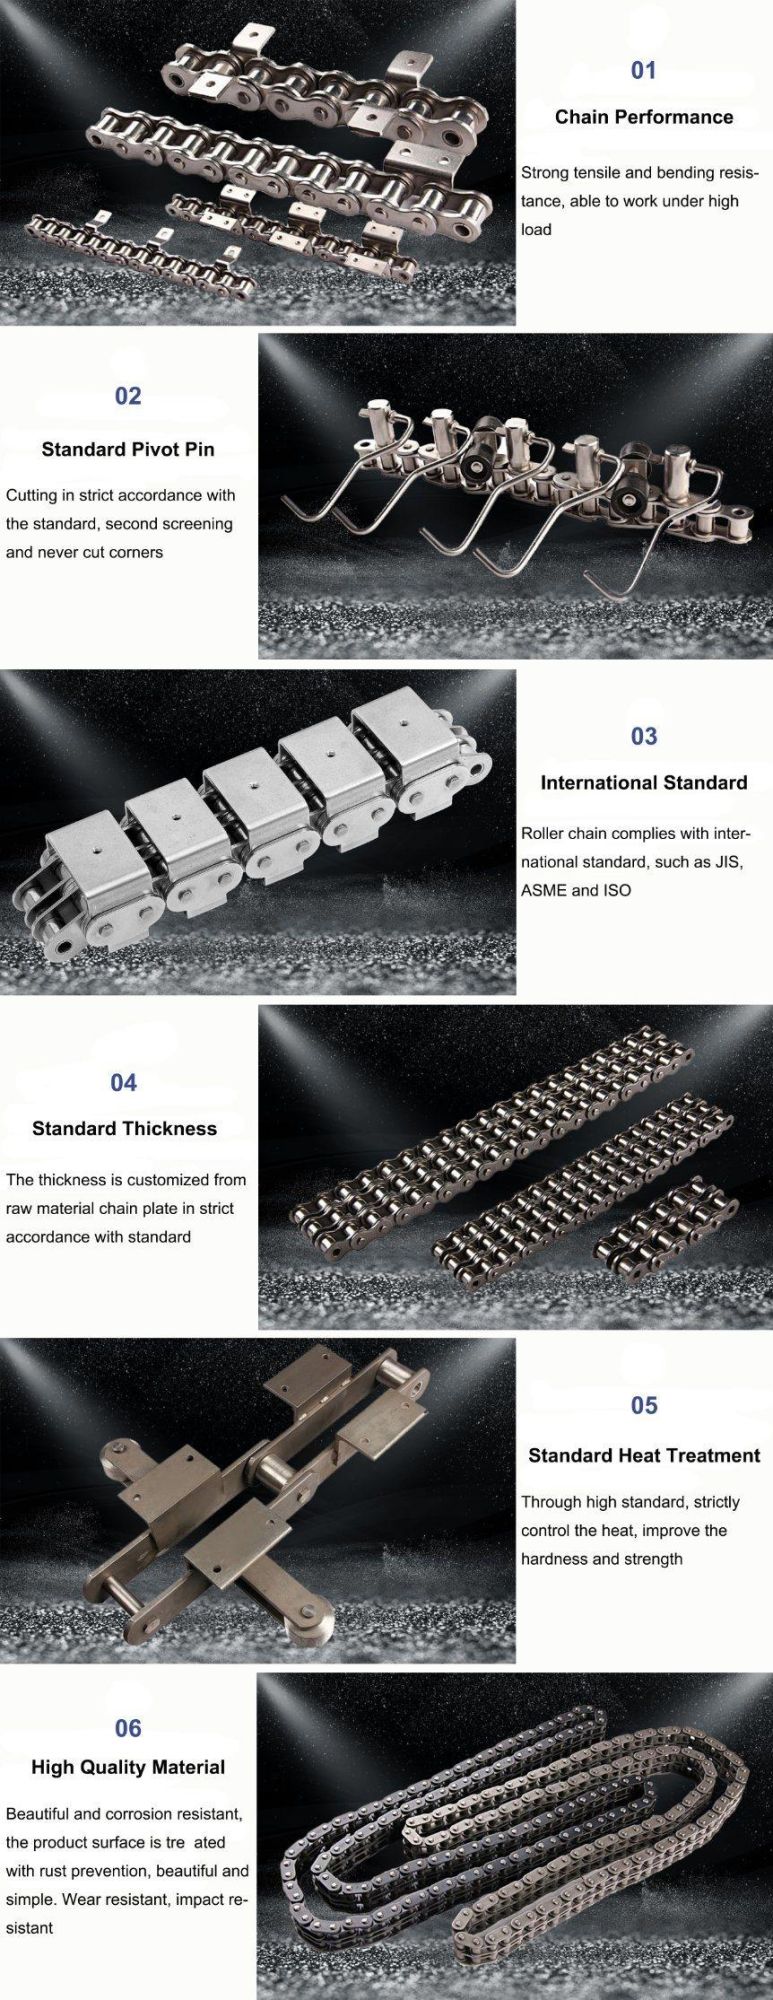 Top Quality DIN Standard Galvanized Heavy Duty Welded Steel Conveyor Chain with Attachment